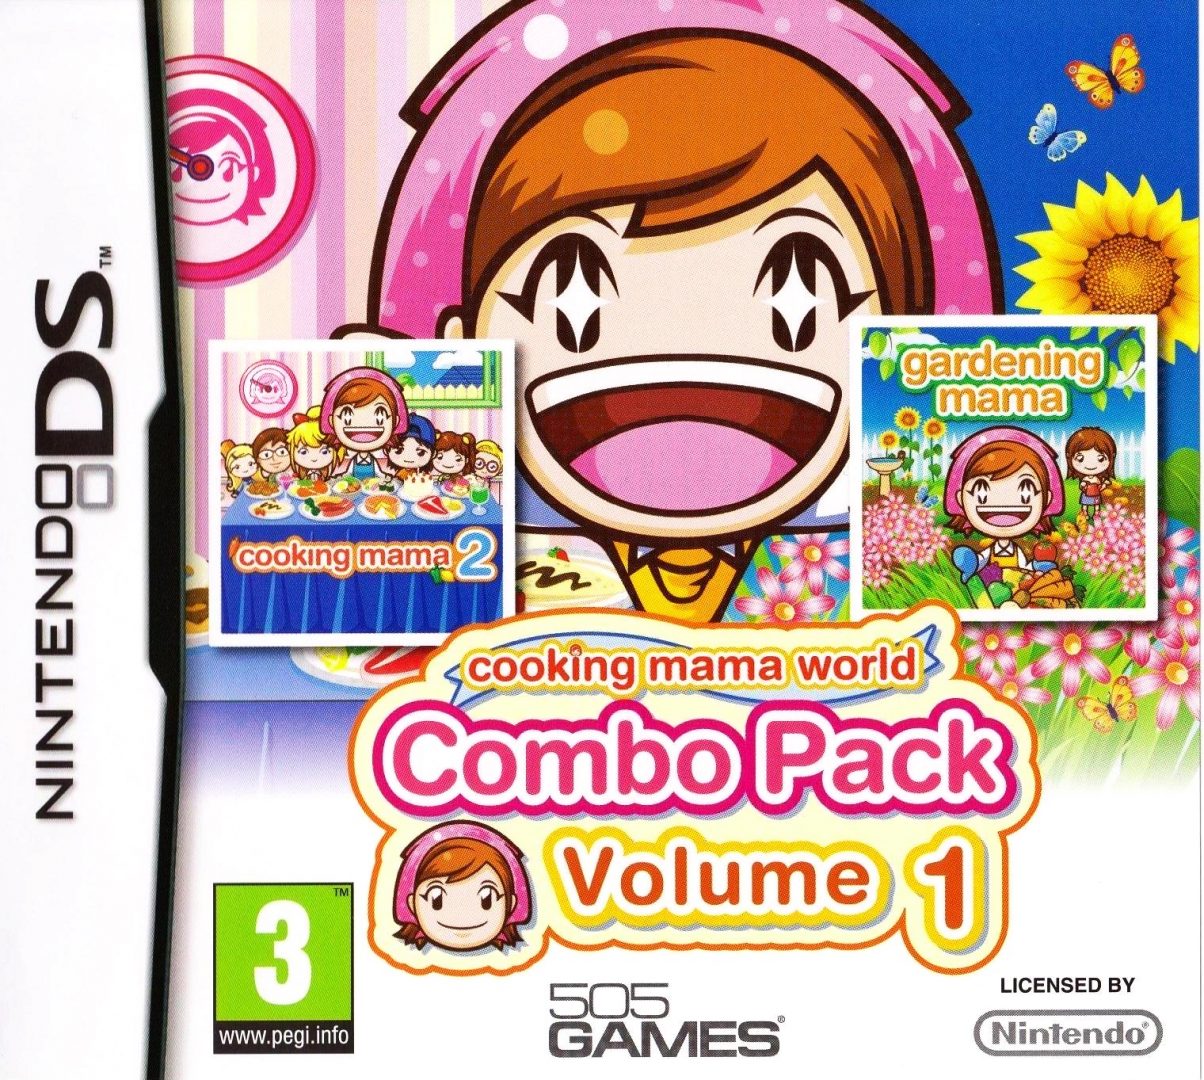 The coverart image of Cooking Mama World: Combo Pack Volume 1